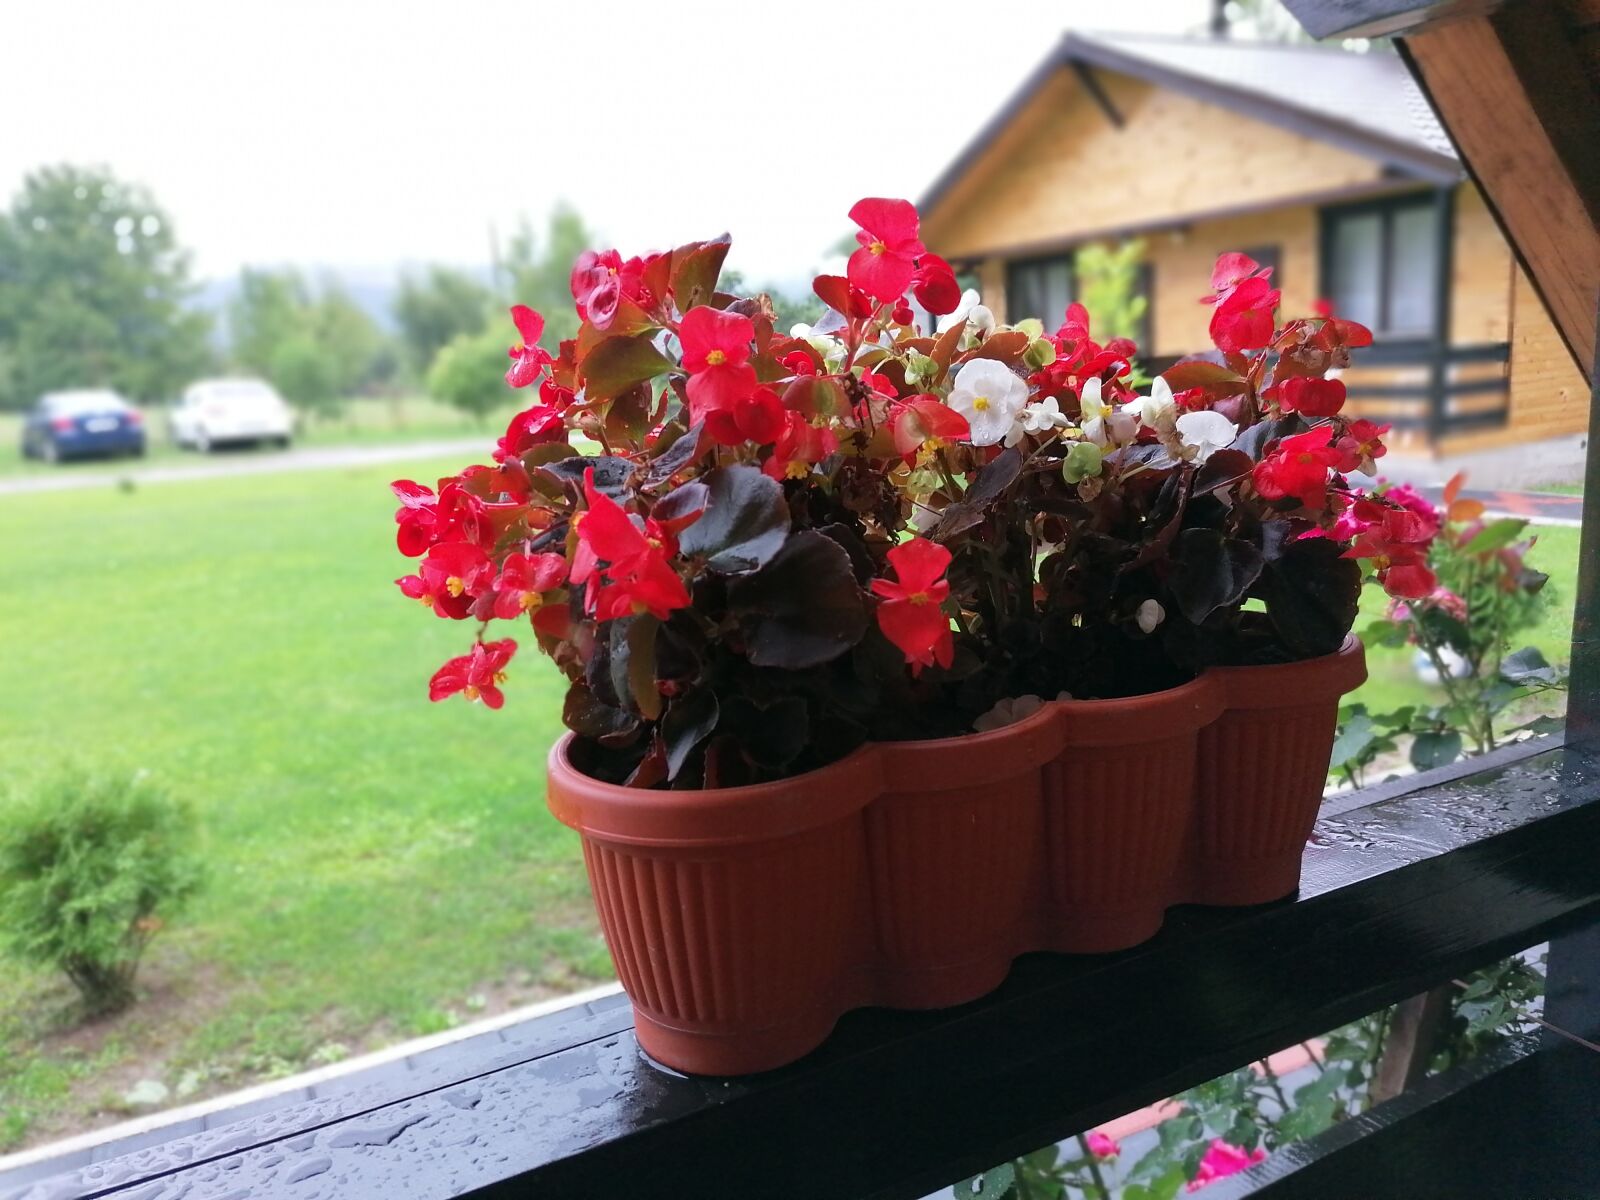 HUAWEI P30 LITE sample photo. Flowers, nature, house photography